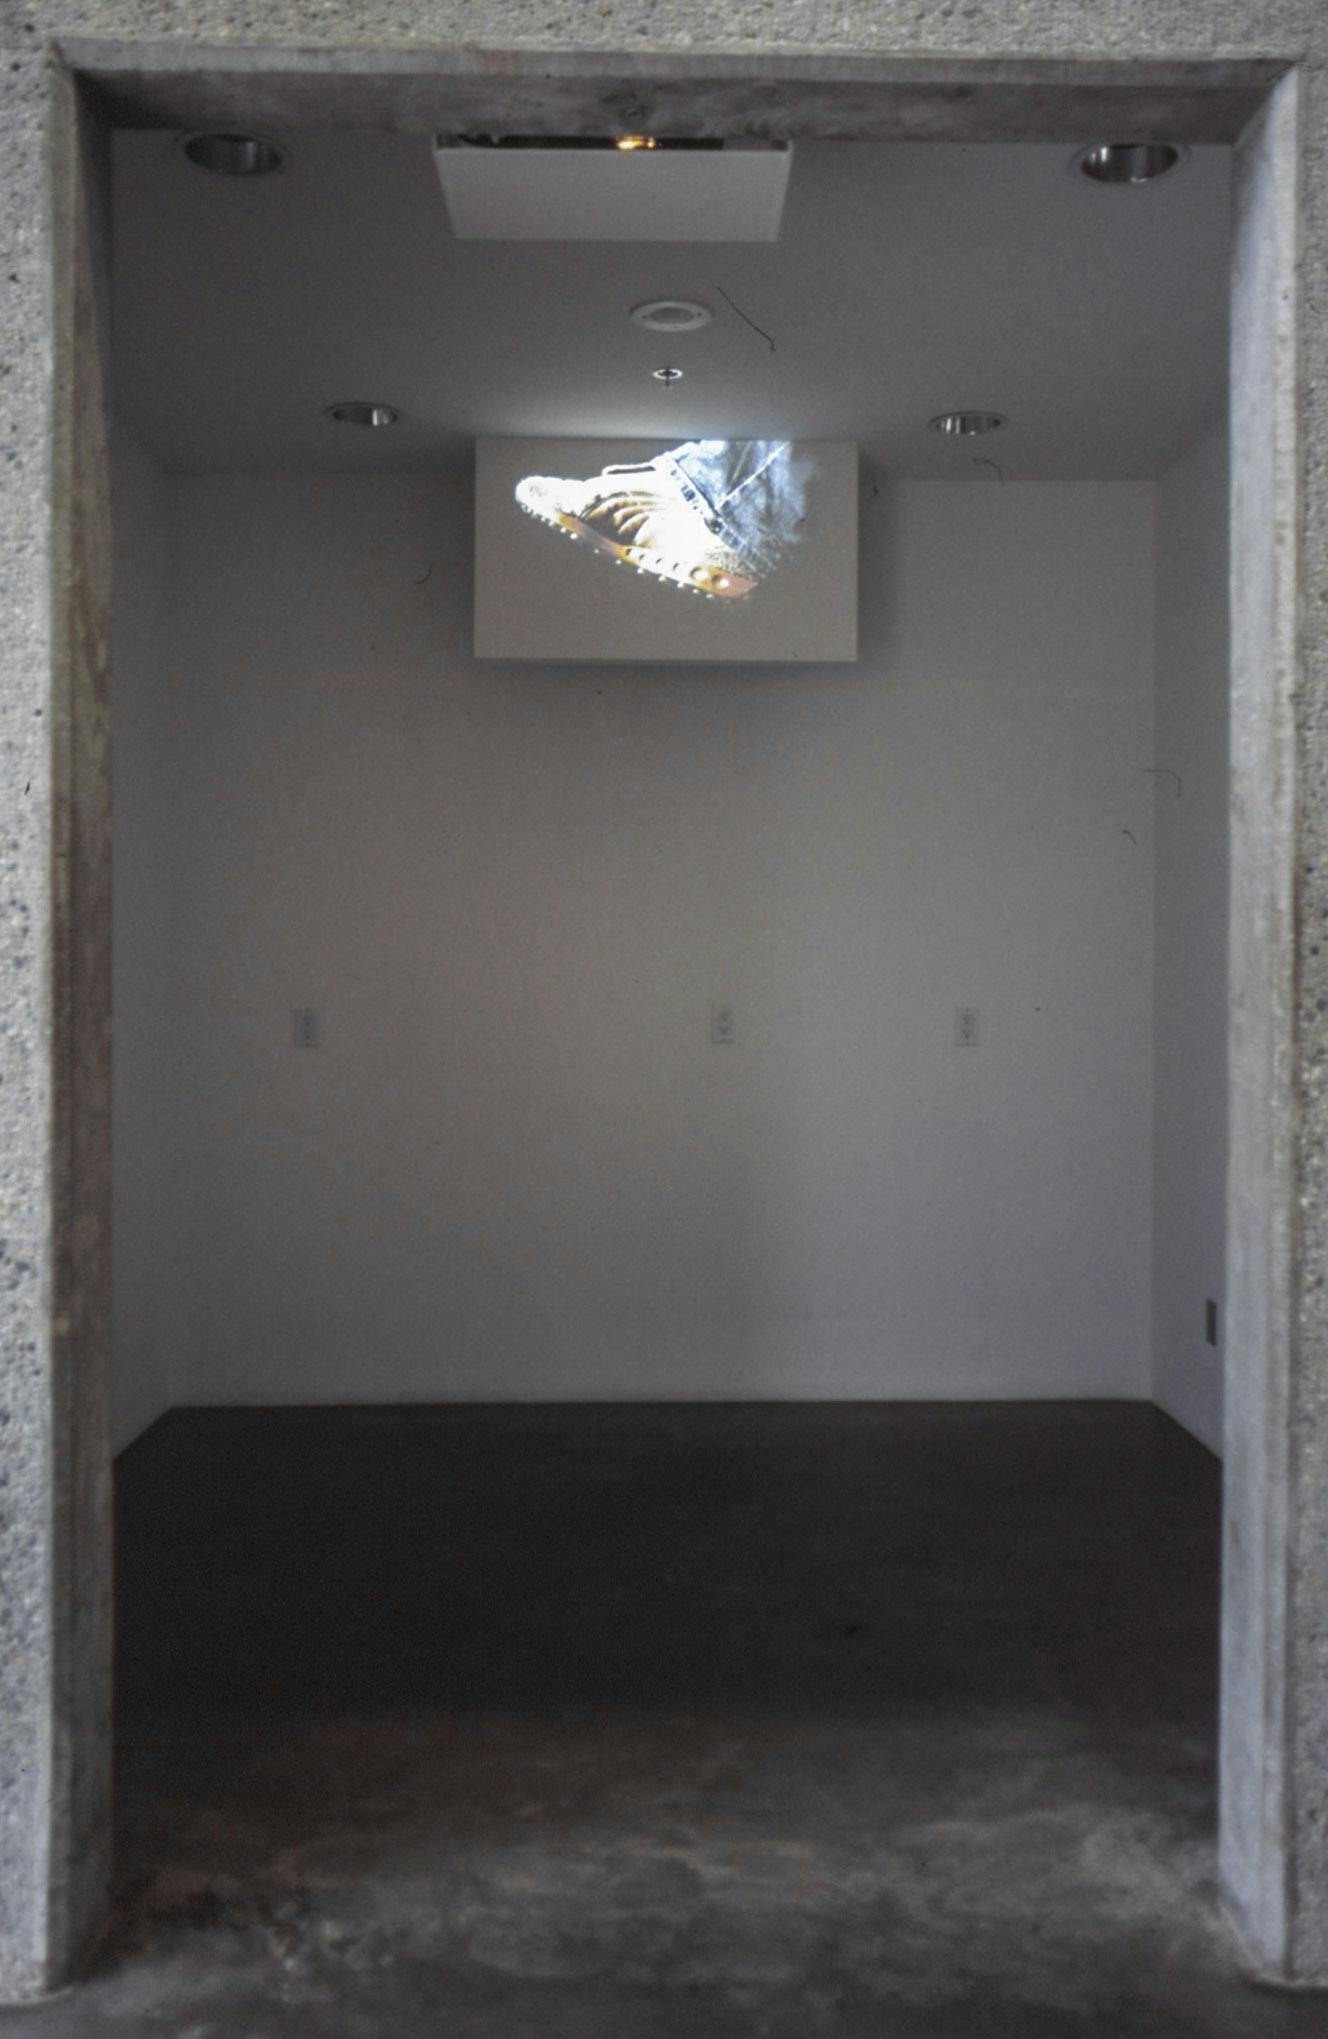 A single-channel video of a runner’s foot is projected at the top of the wall in a gallery space. The video shows a foot wearing a white sneaker and blue jeans running in the dark.